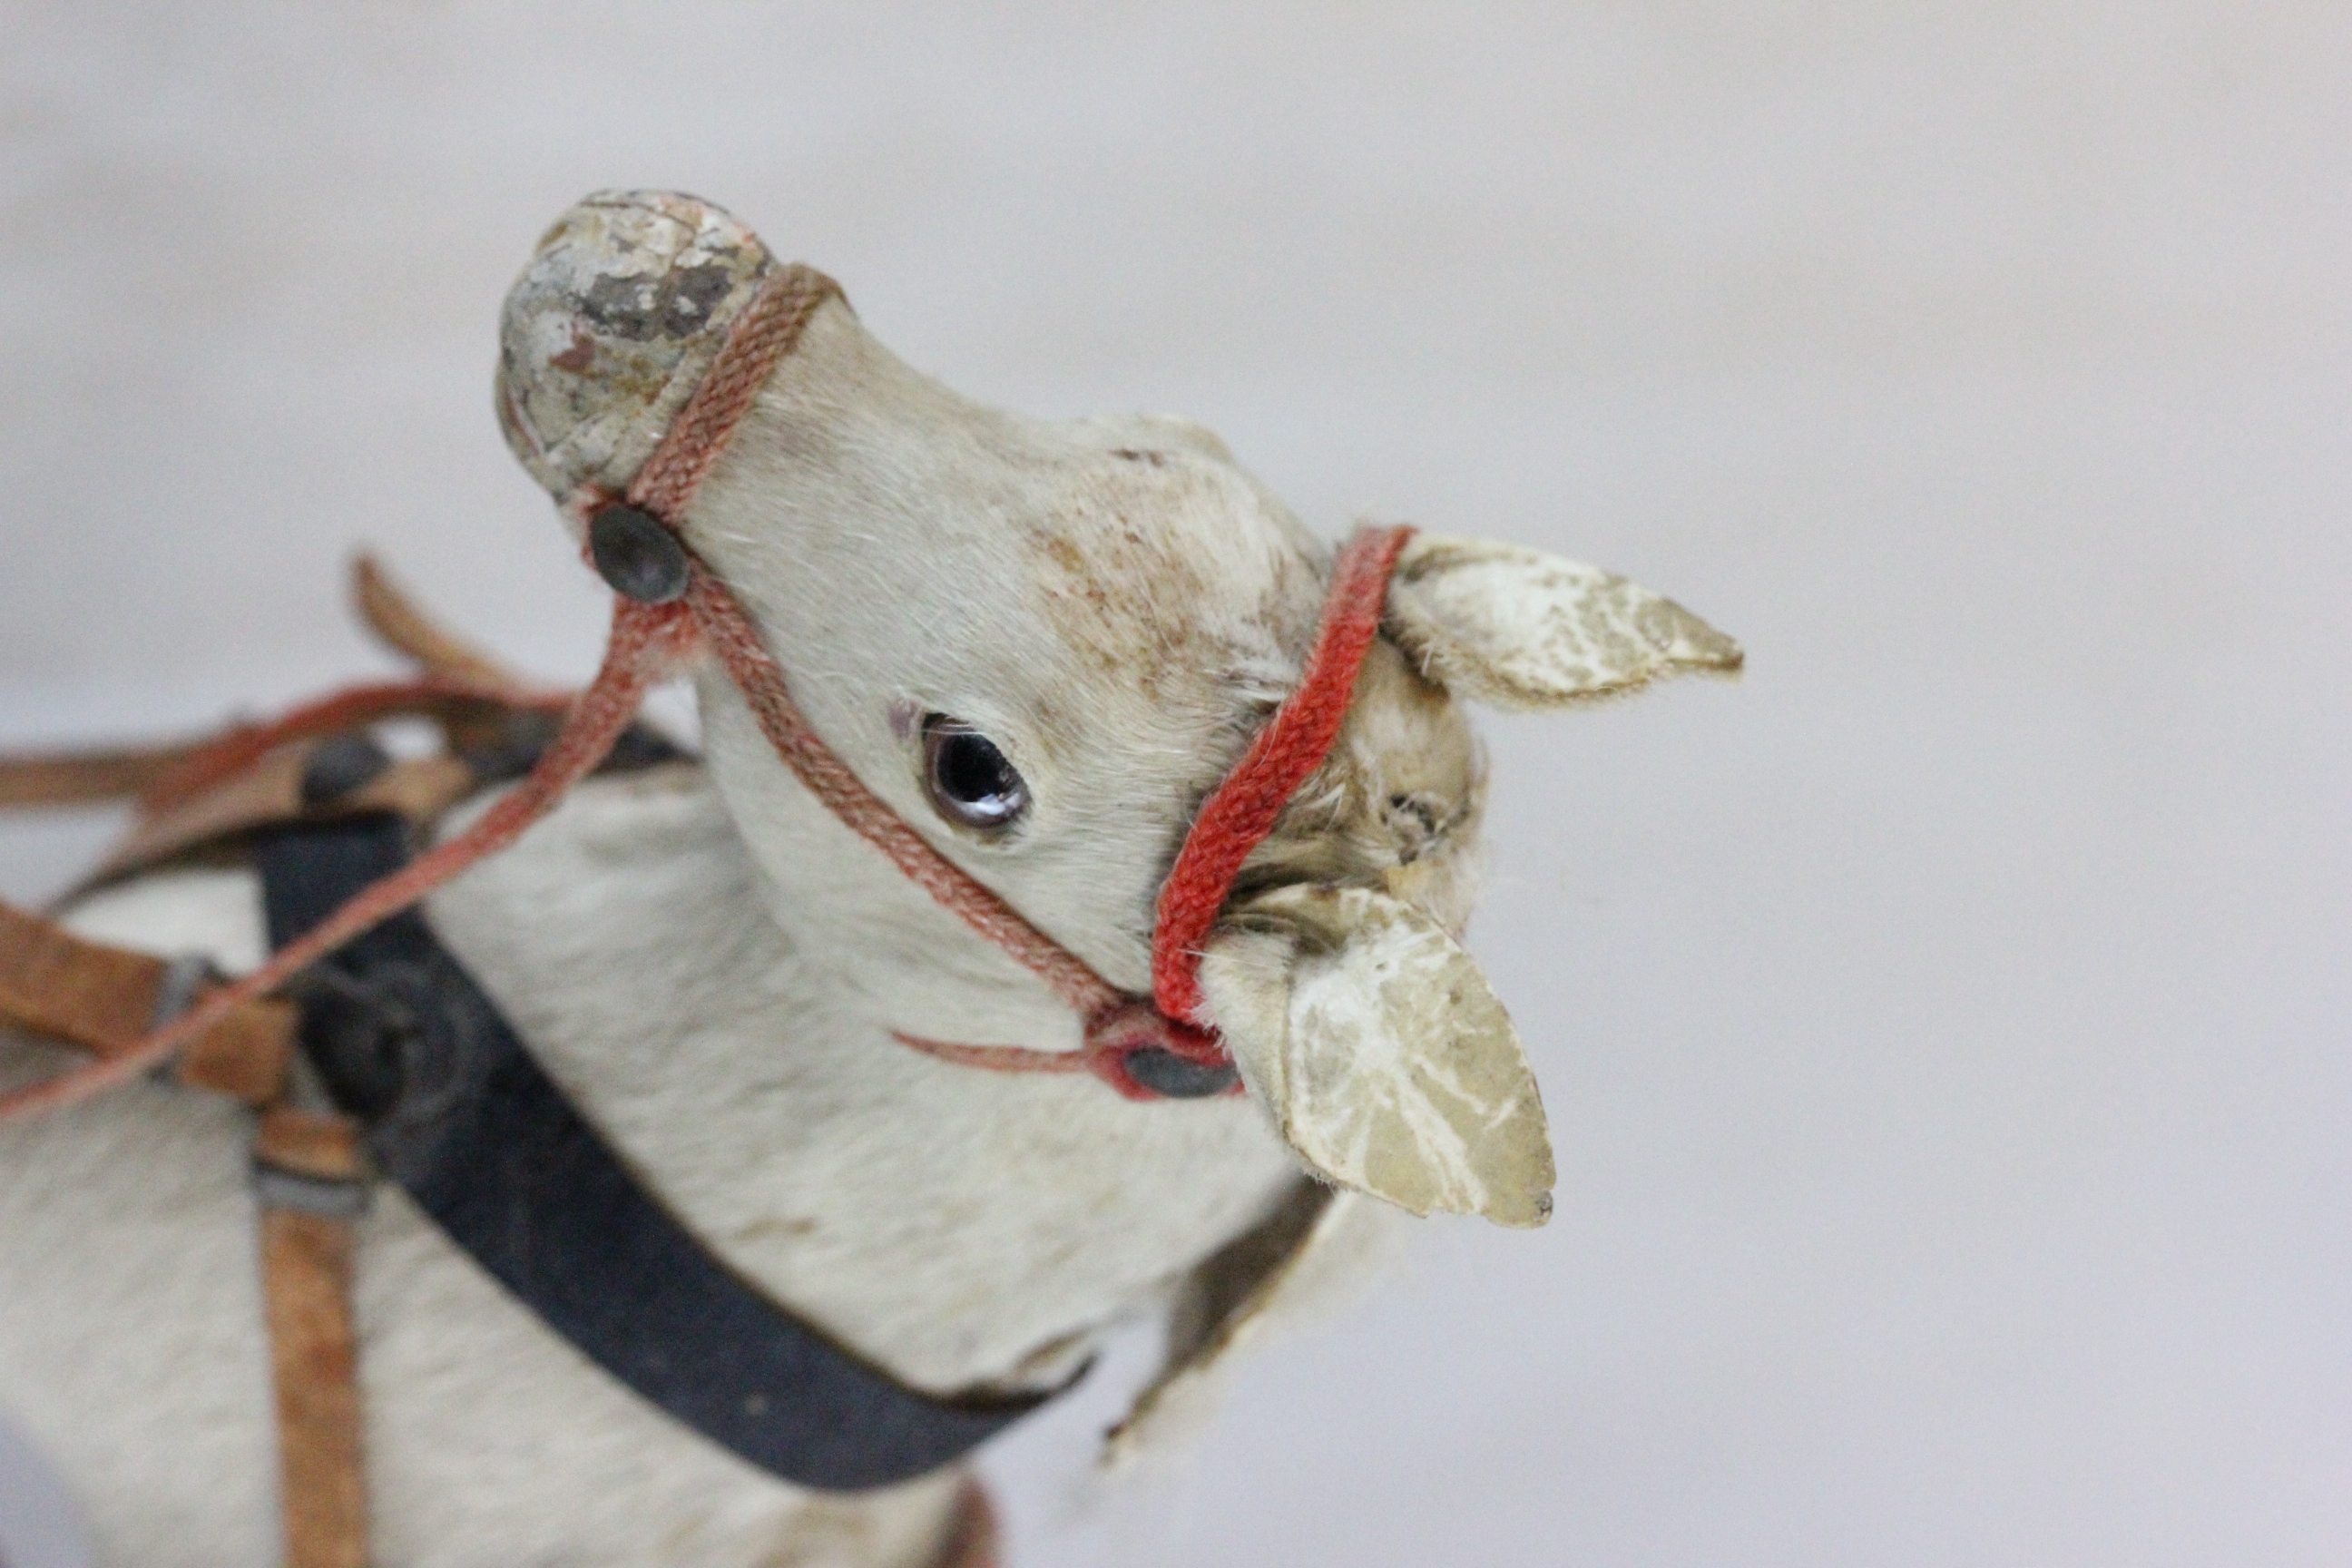 Vintage toy horse with cart - Image 2 of 2